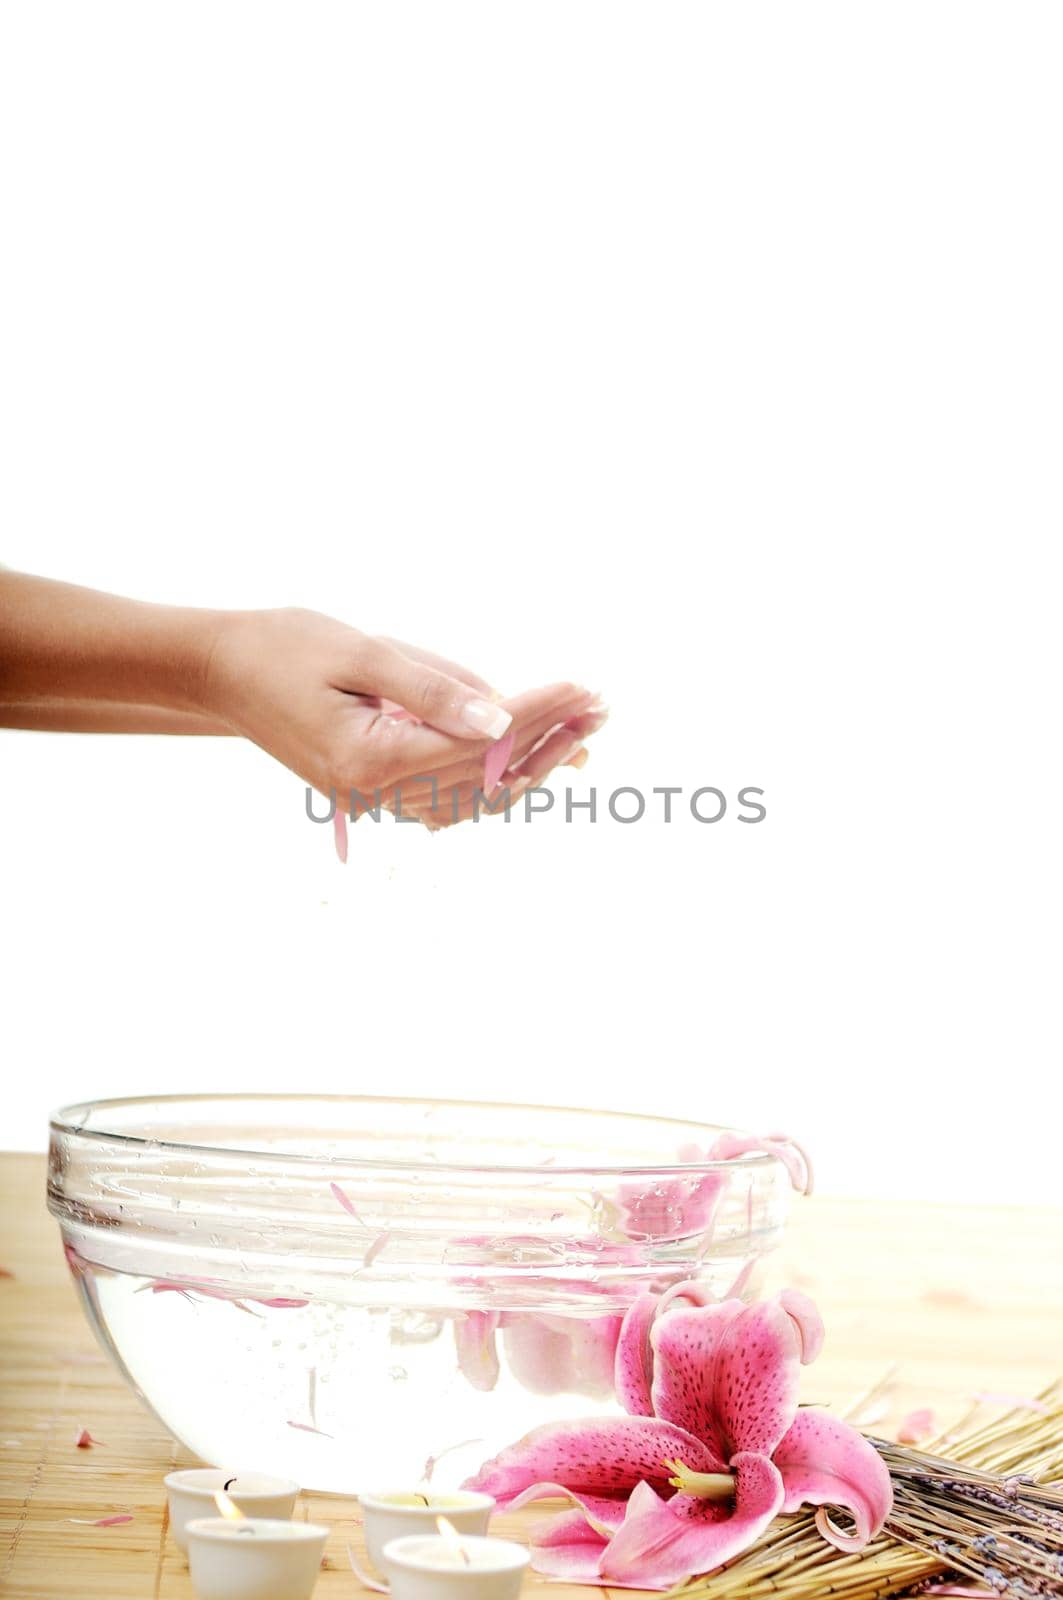 hand  and nail spa and beauty treatment with aroma and flowers in water isolated on white